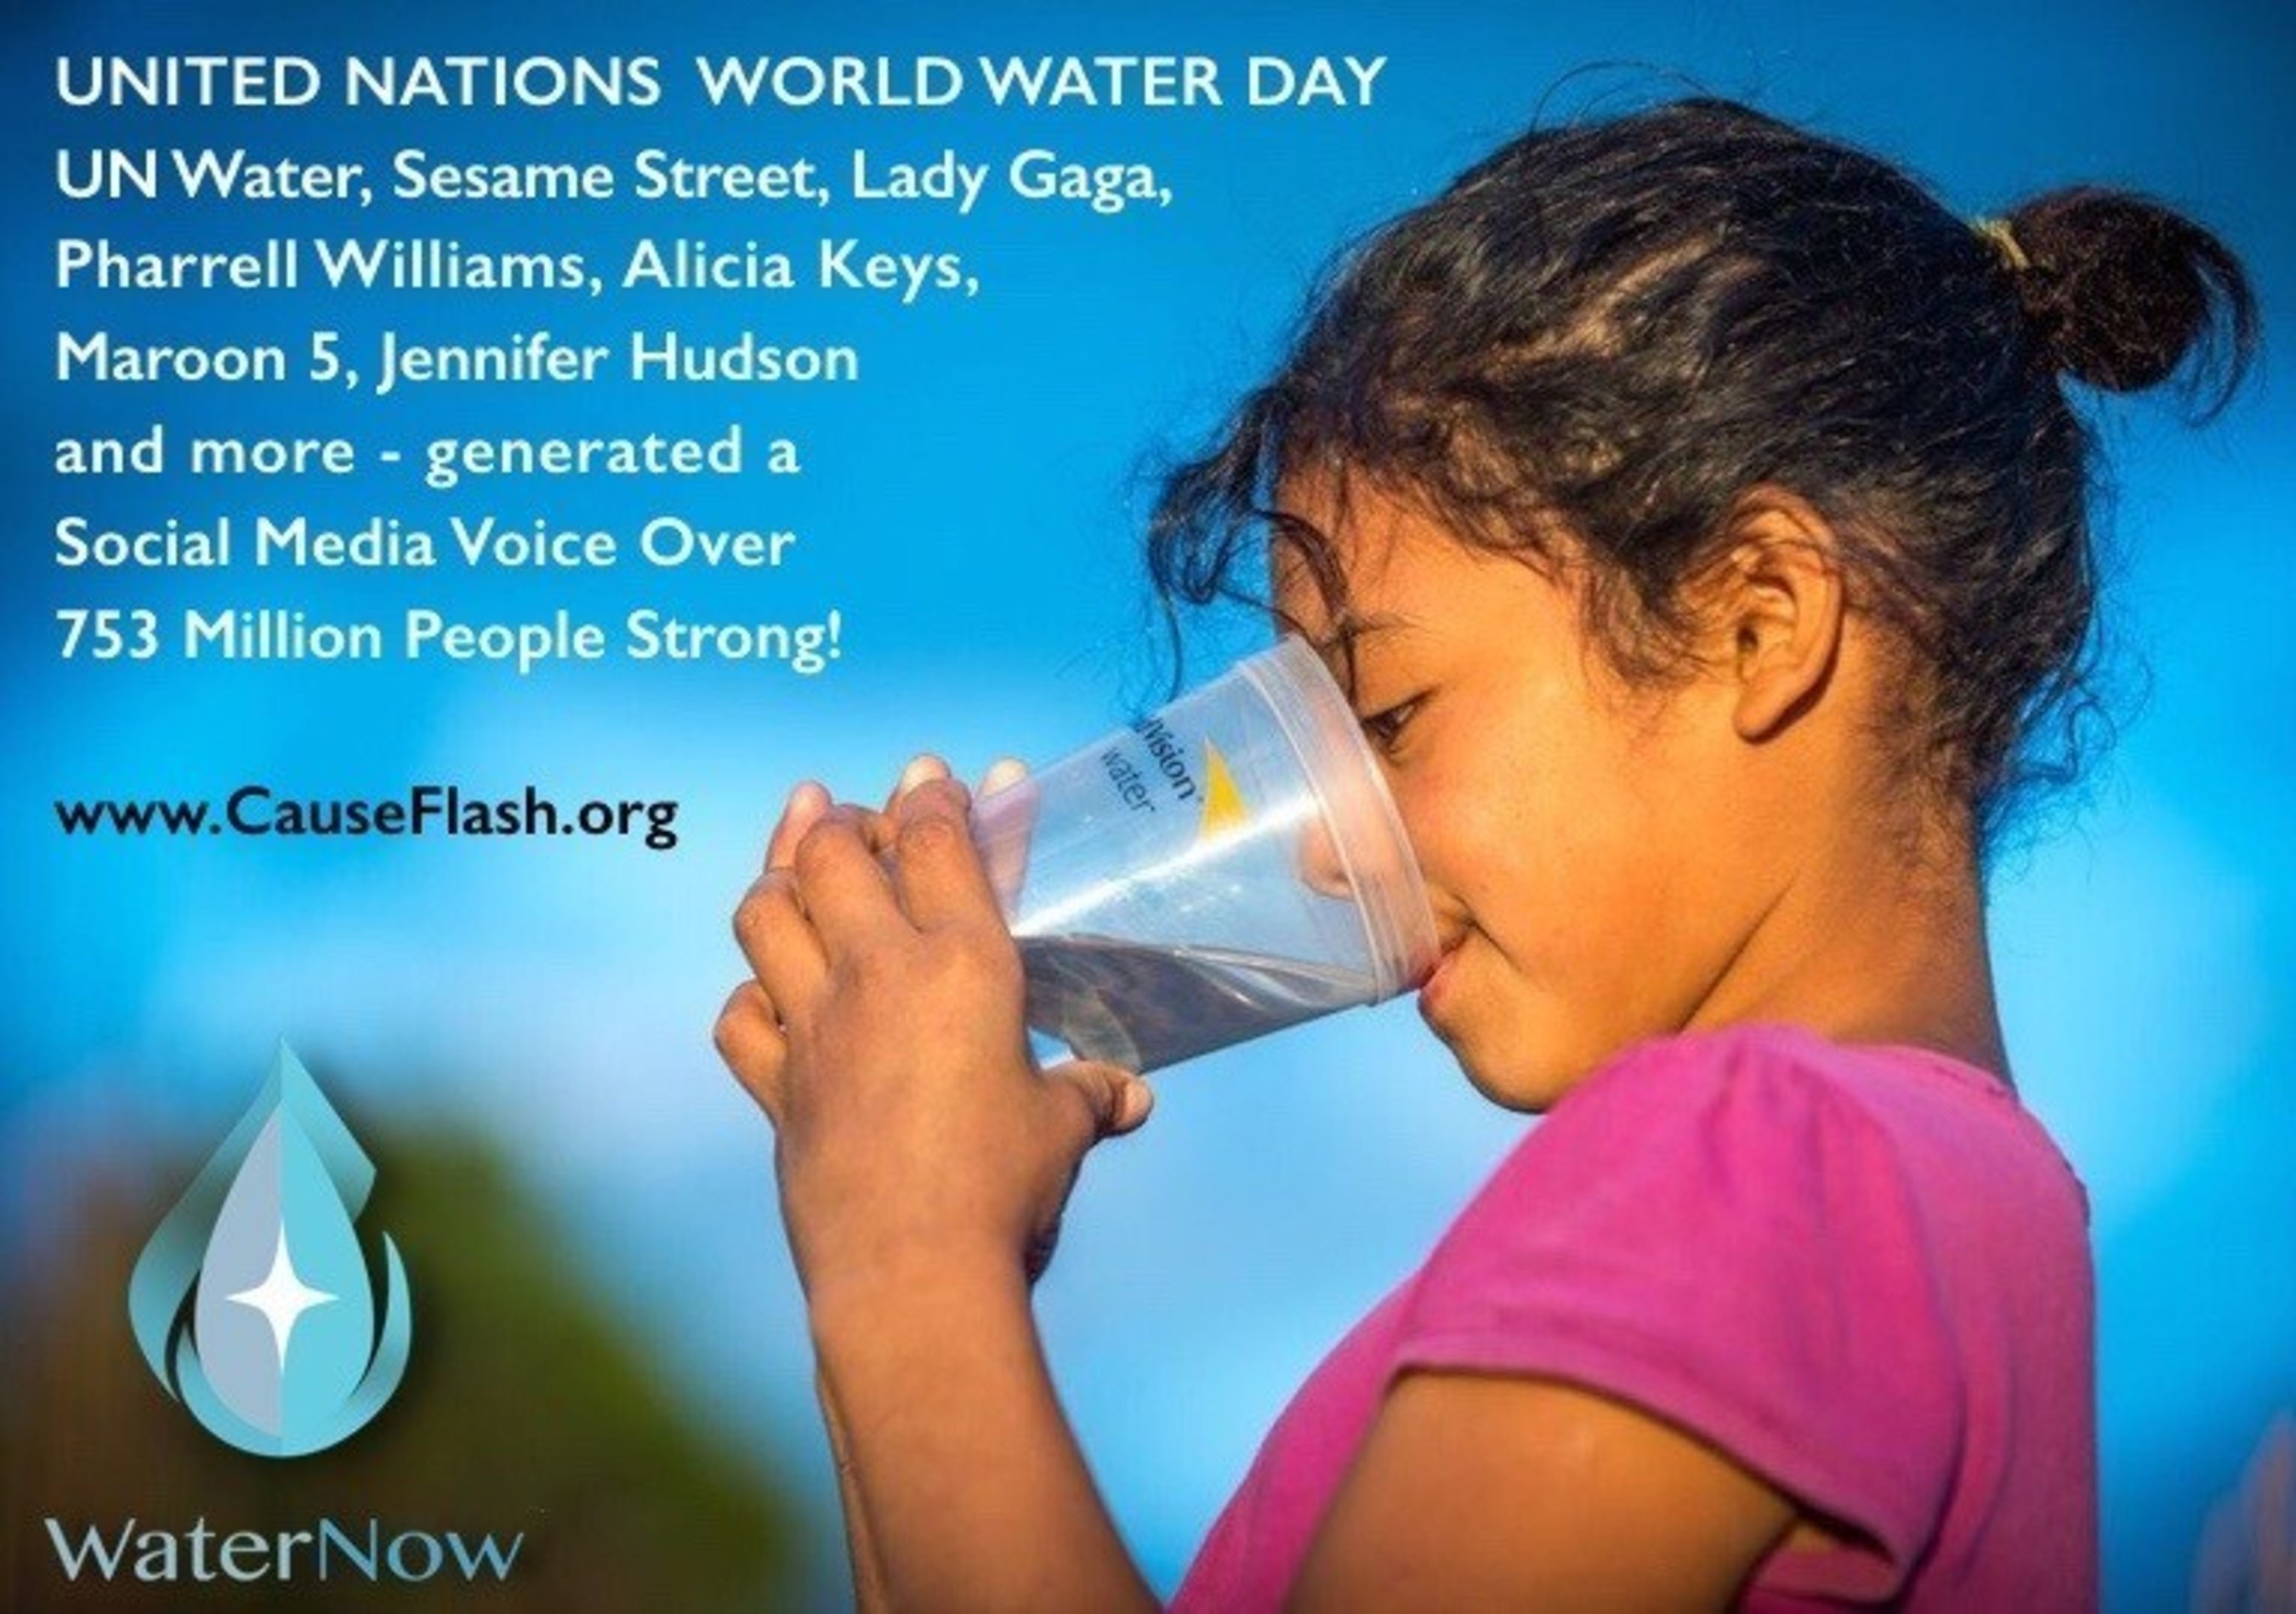 Water Now promotes UN World Water Day so children can receive clean water via World Vision Water